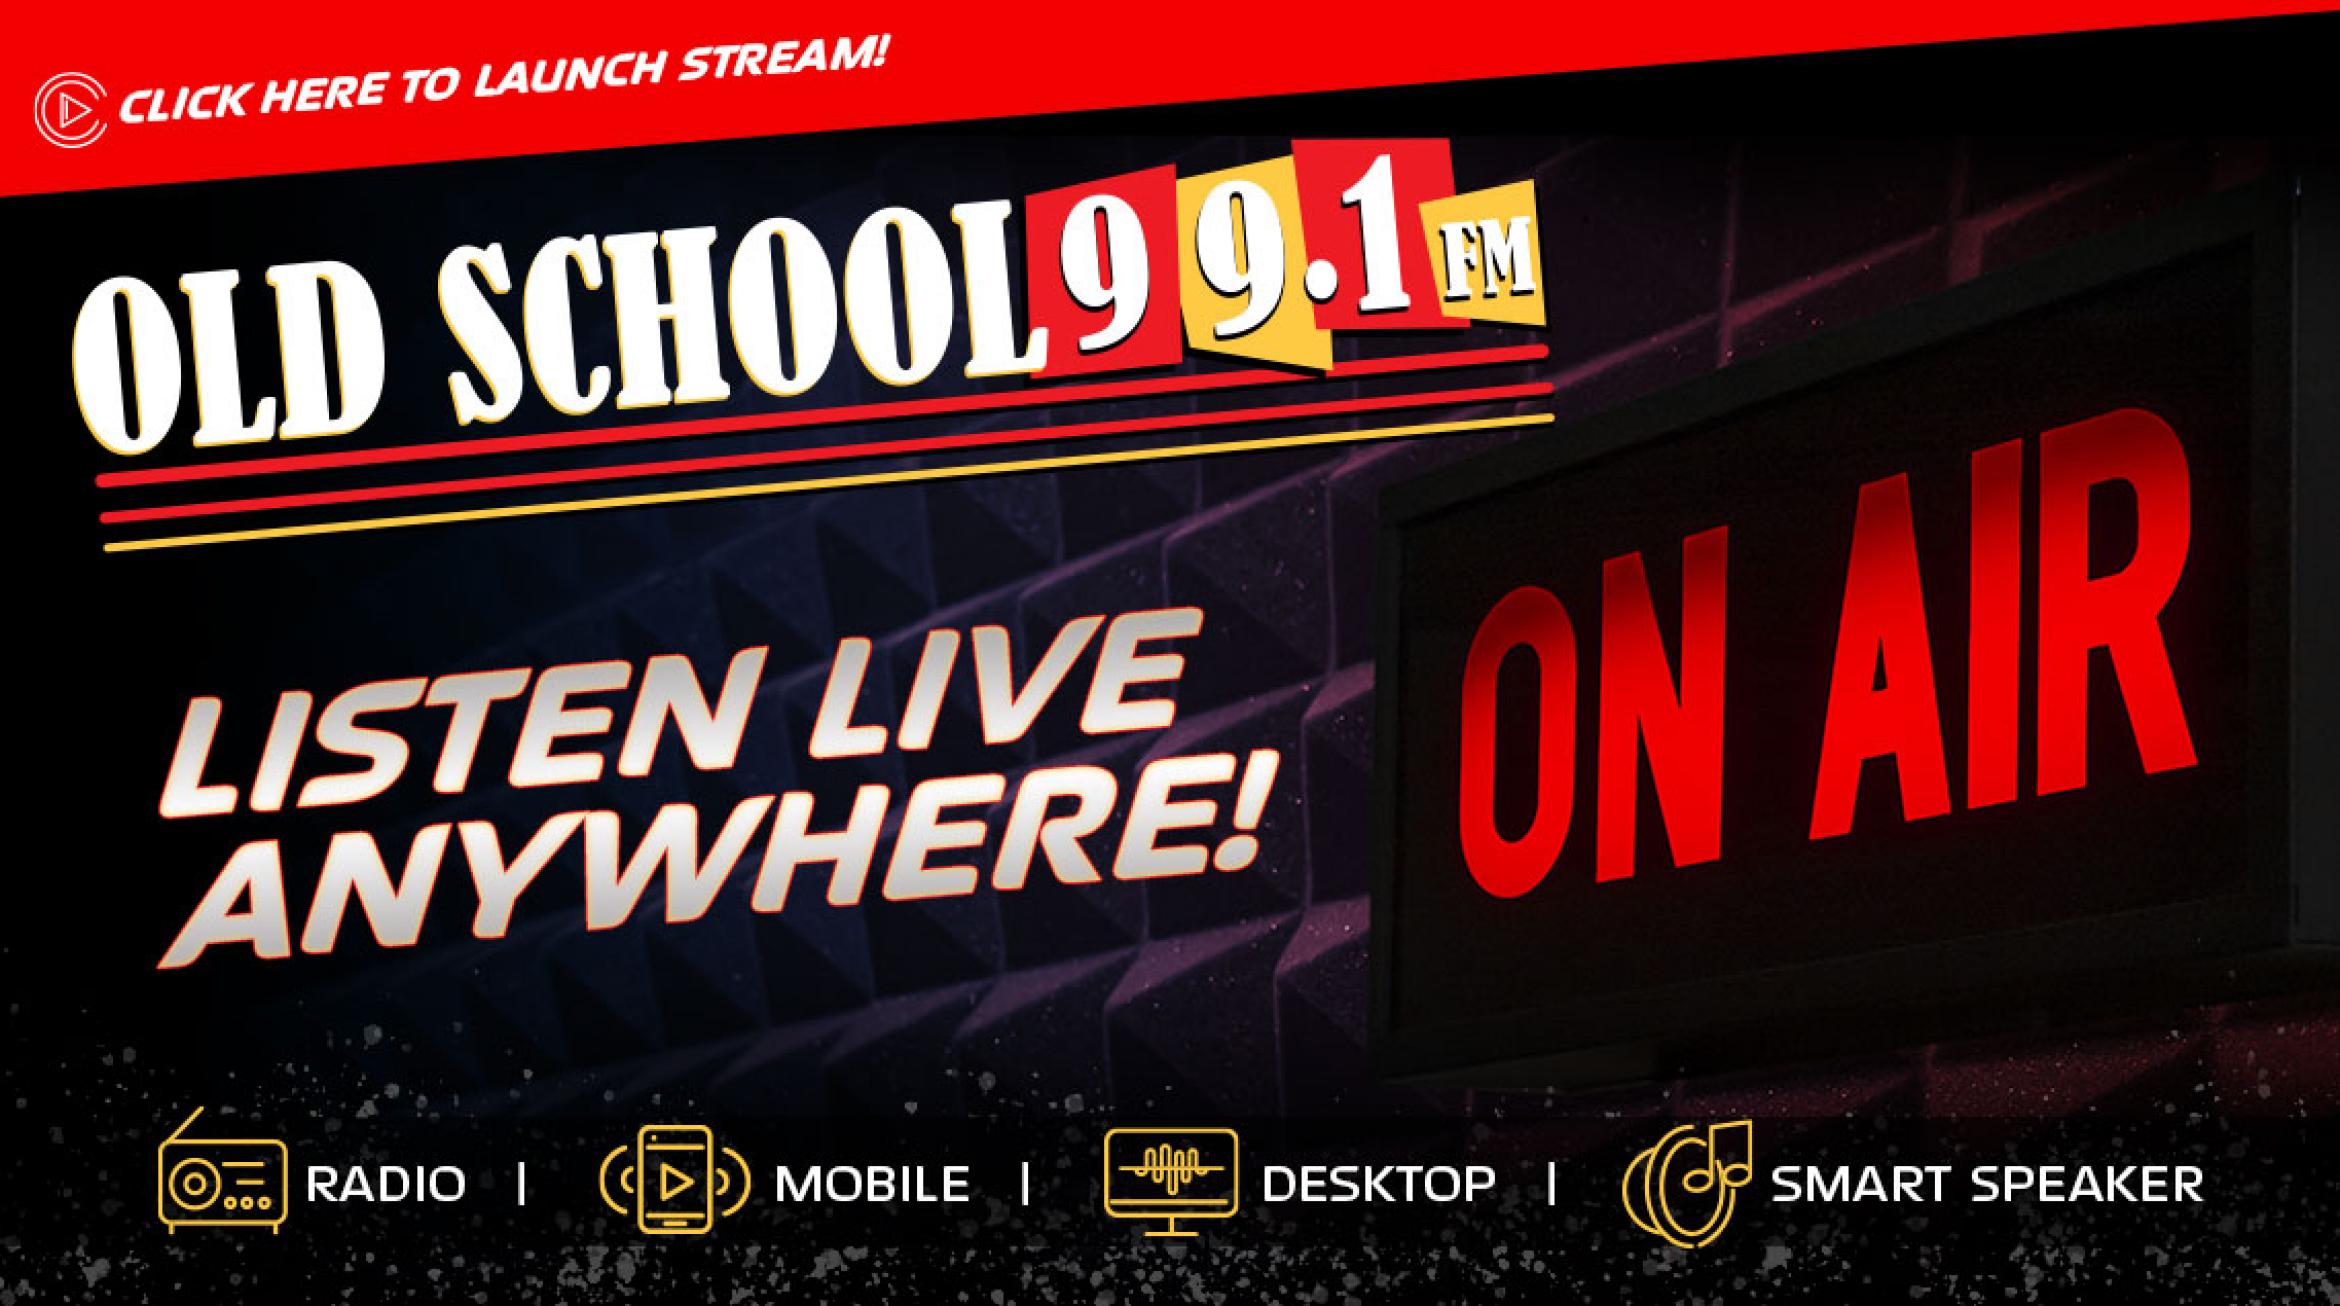 1140x635 ListenLive Anywhere Oldschool 991